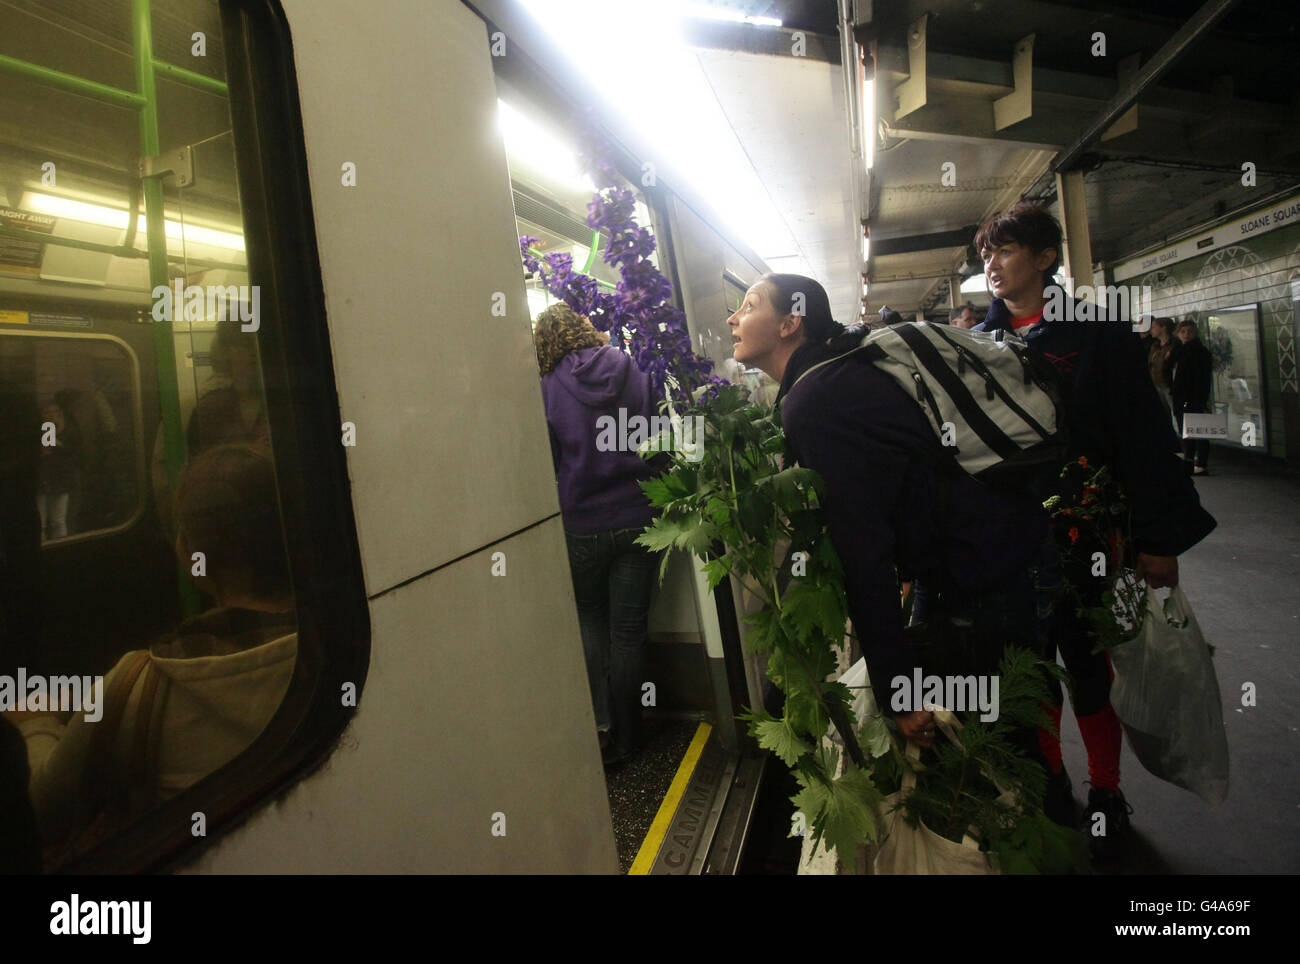 A woman with plants purchased on the last day from the RHS Chelsea Flower Show boarding a train at Sloane Sqaure Underground Station, in west London. Stock Photo